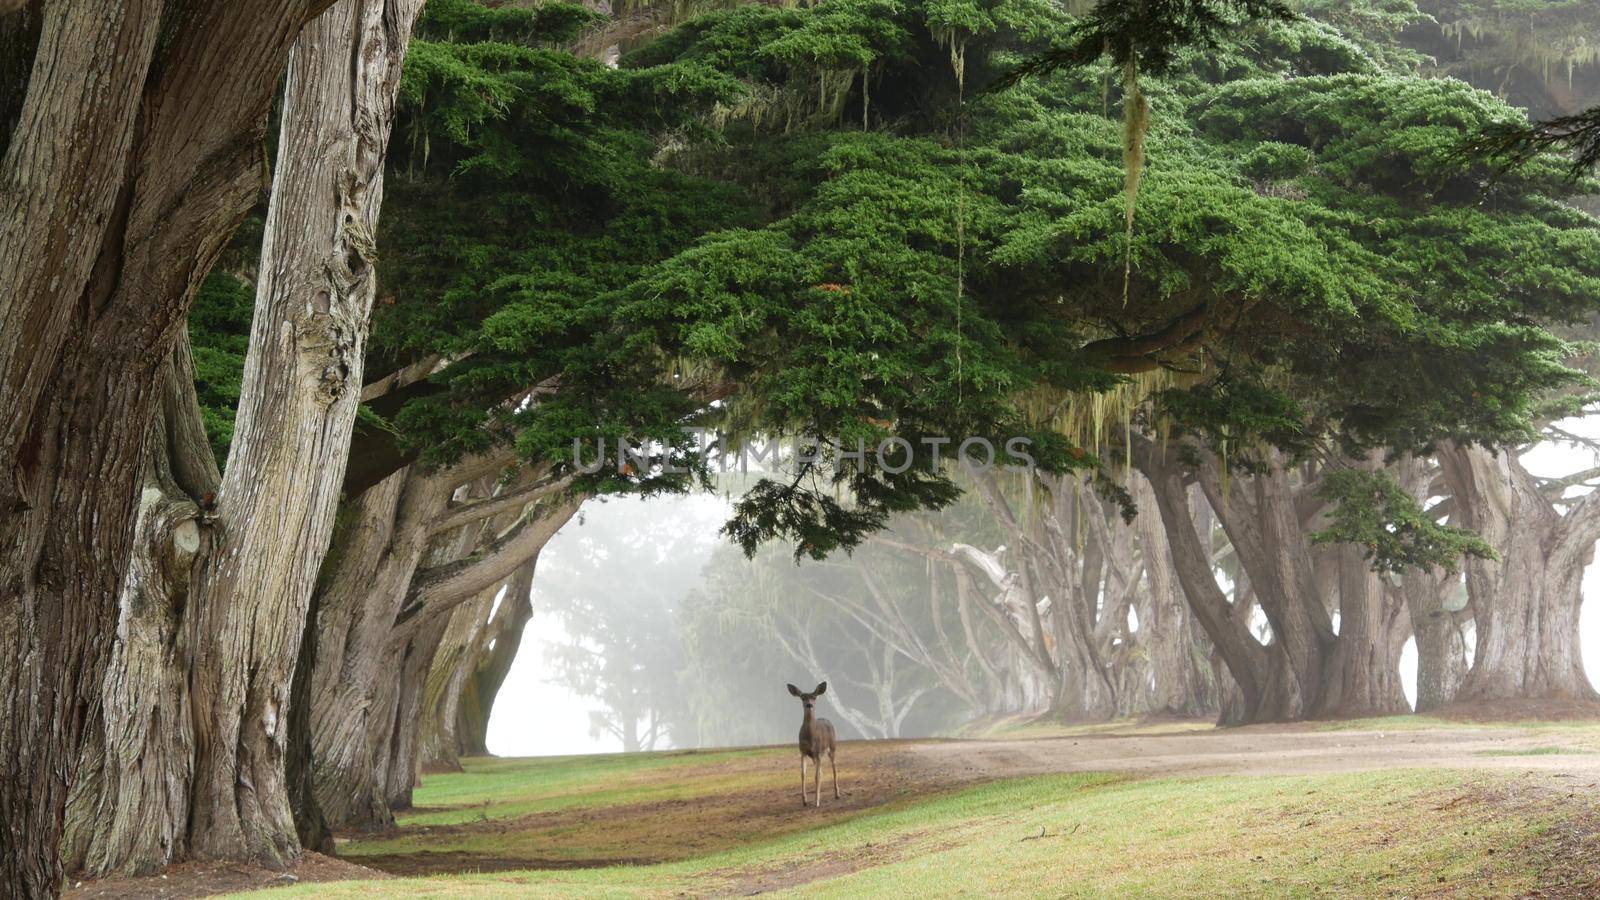 Wild young deer grazing, green lawn grass. Fawn calf animal in freedom, cypress trees tunnel or corridor, arch alley, foggy forest. Misty weather, Monterey, California wildlife, USA. Lace lichen moss.